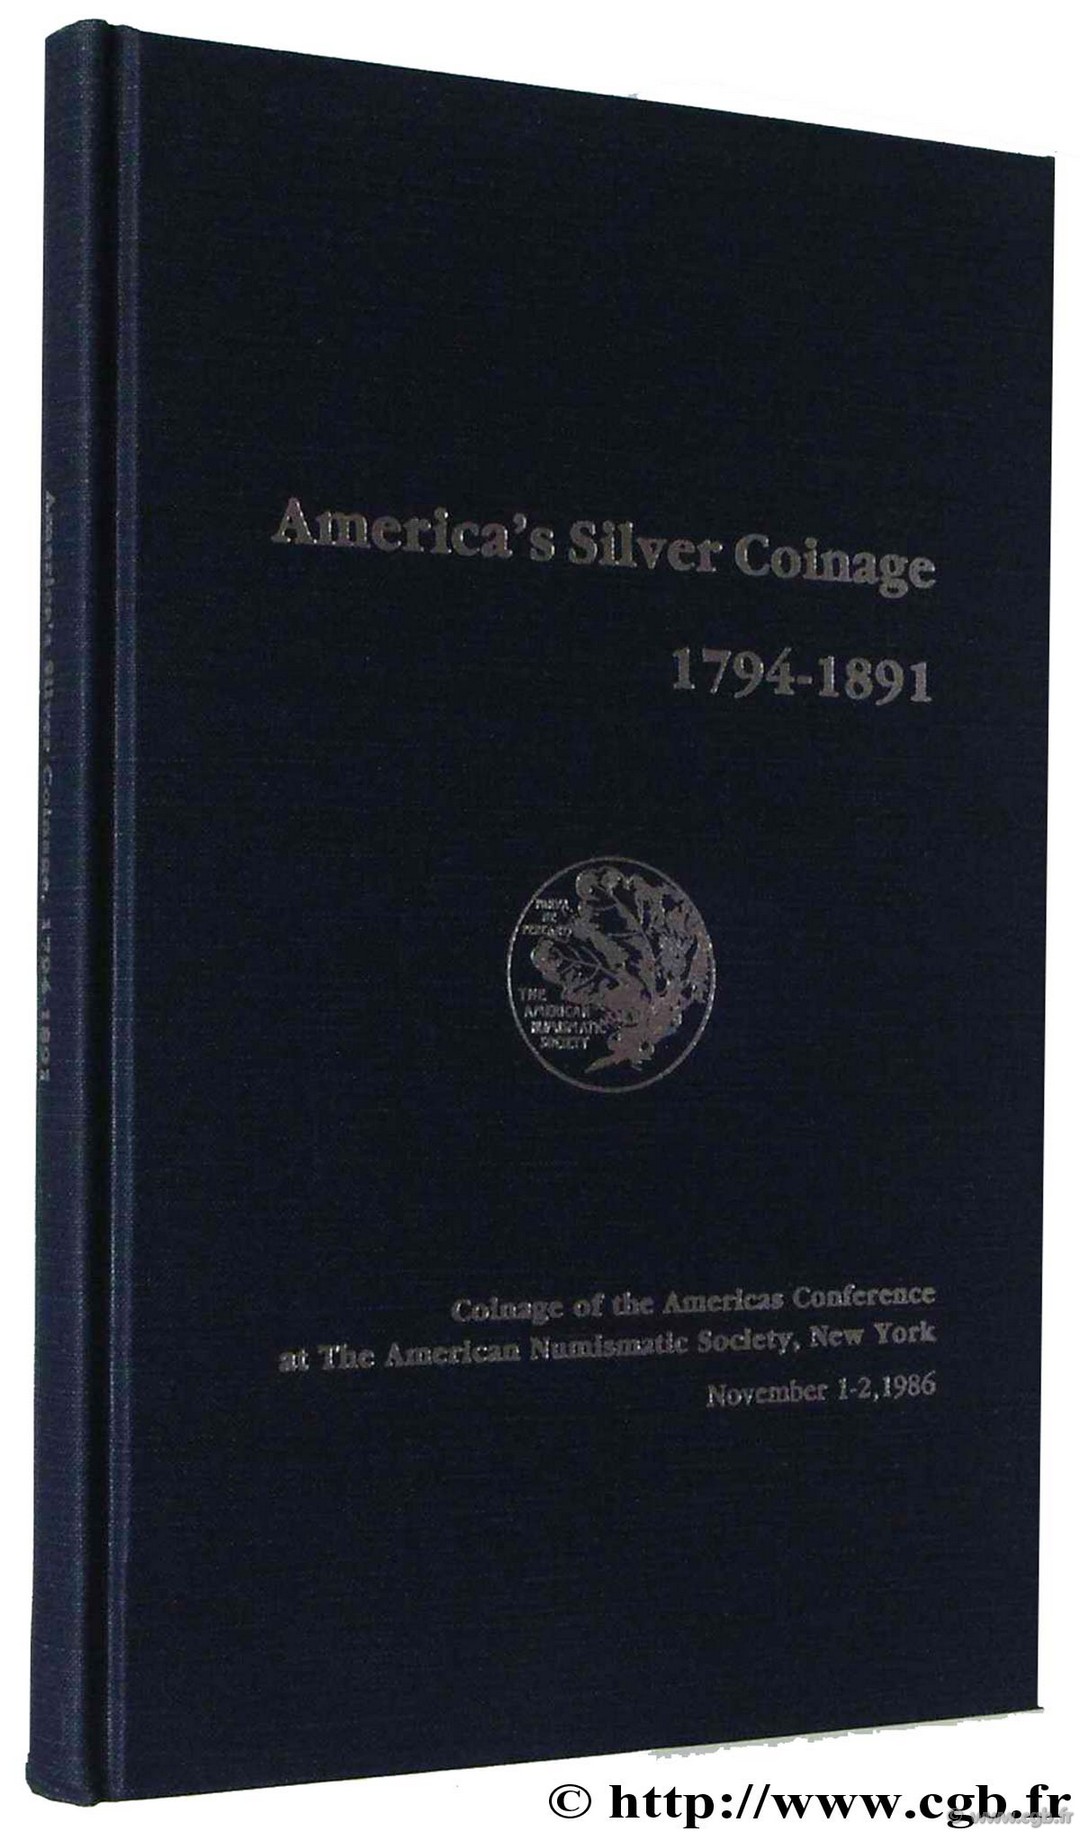 América s Silver coinage 1794-1891, coinage of the americas conference at American Numismatic Society, New York November 1-2, 1986 